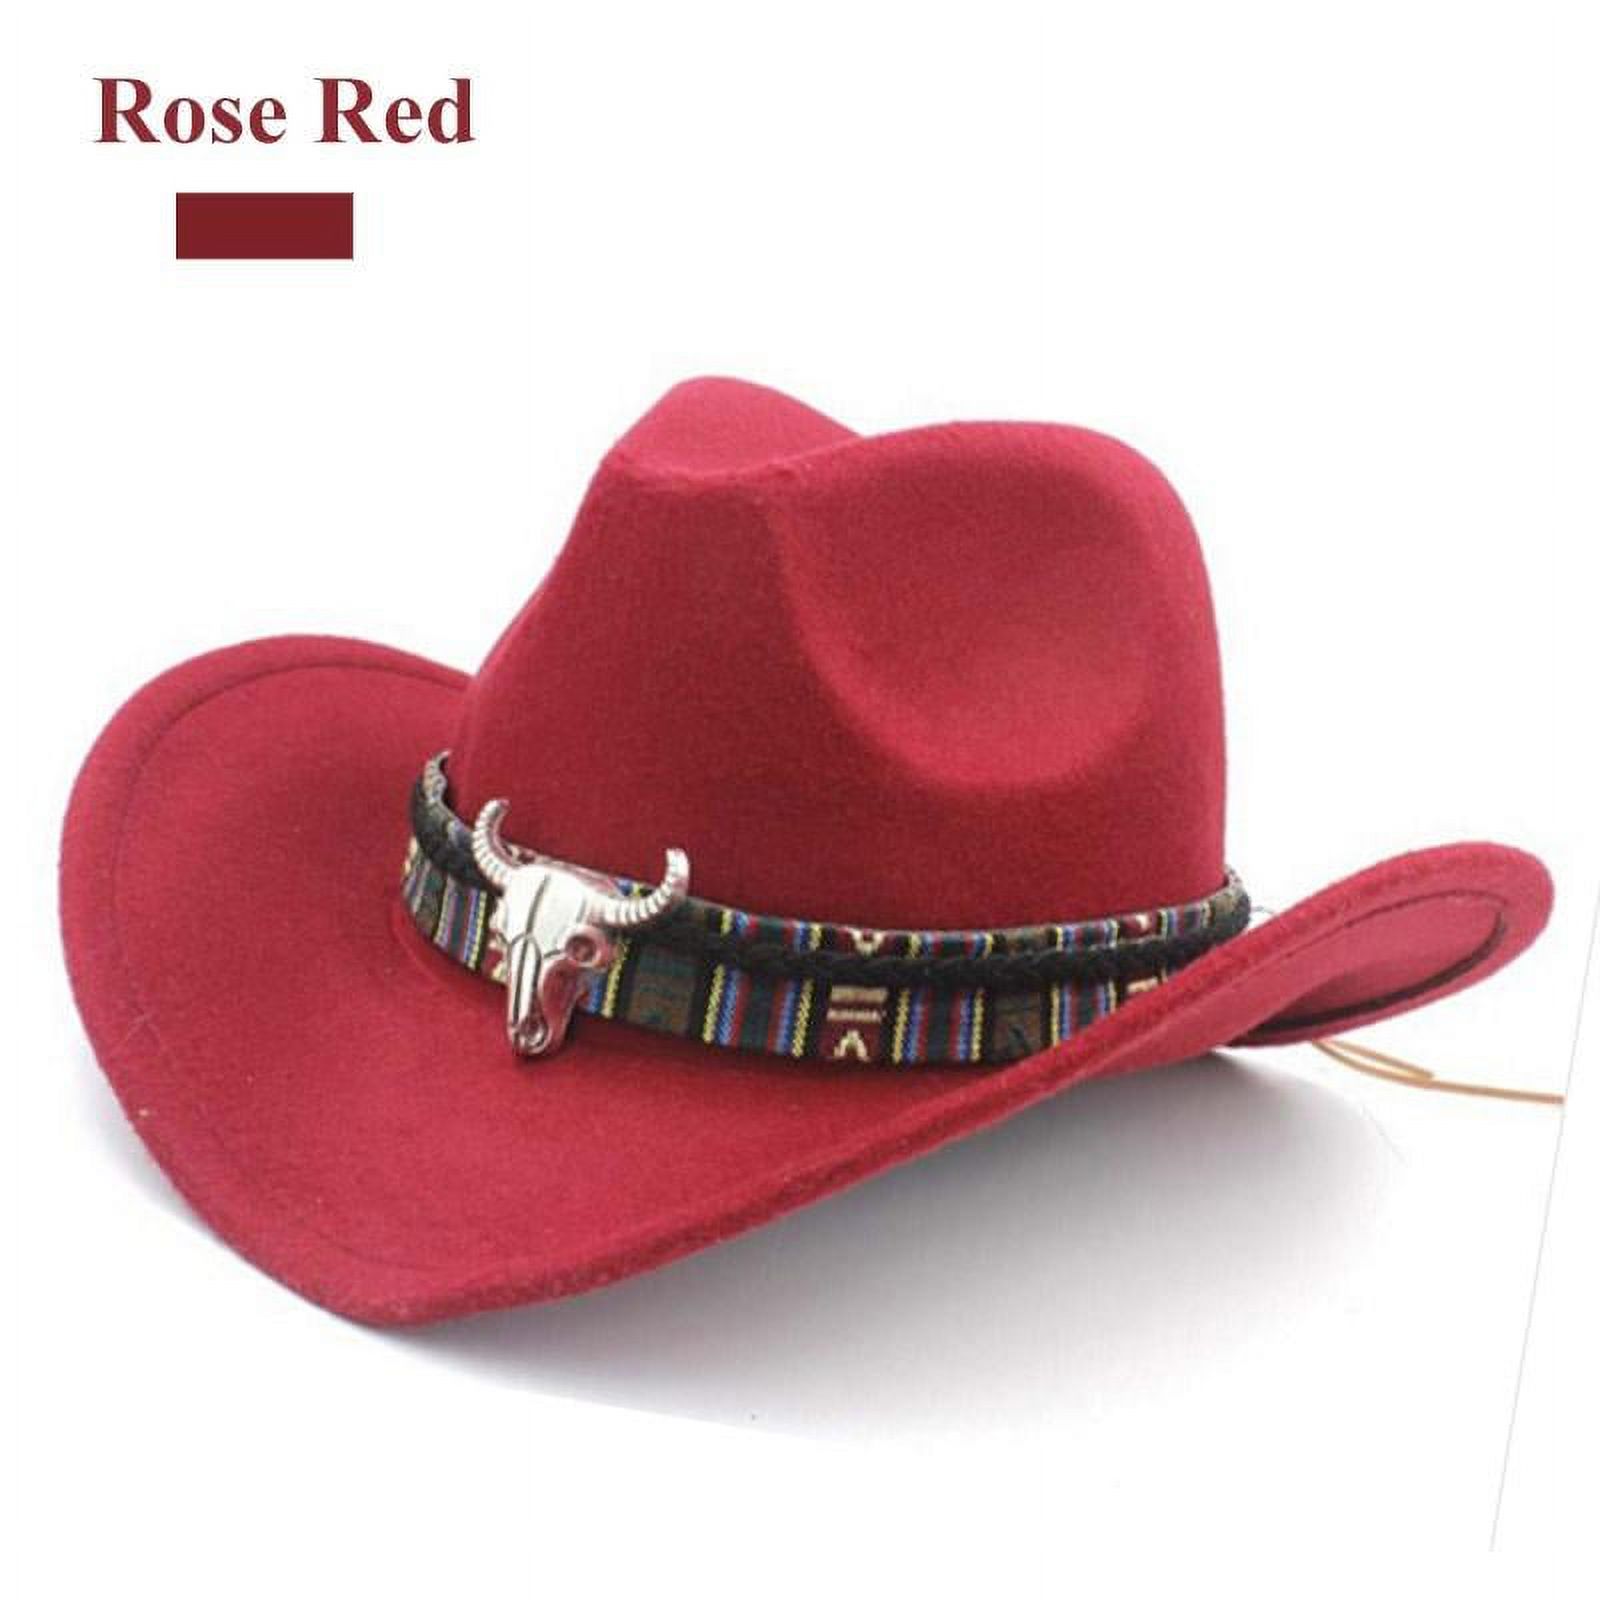 New Ethnic Style Western Cowboy Hat Women's Wool Hat Jazz Hat Western Cowboy Hat Wine Red - image 1 of 3